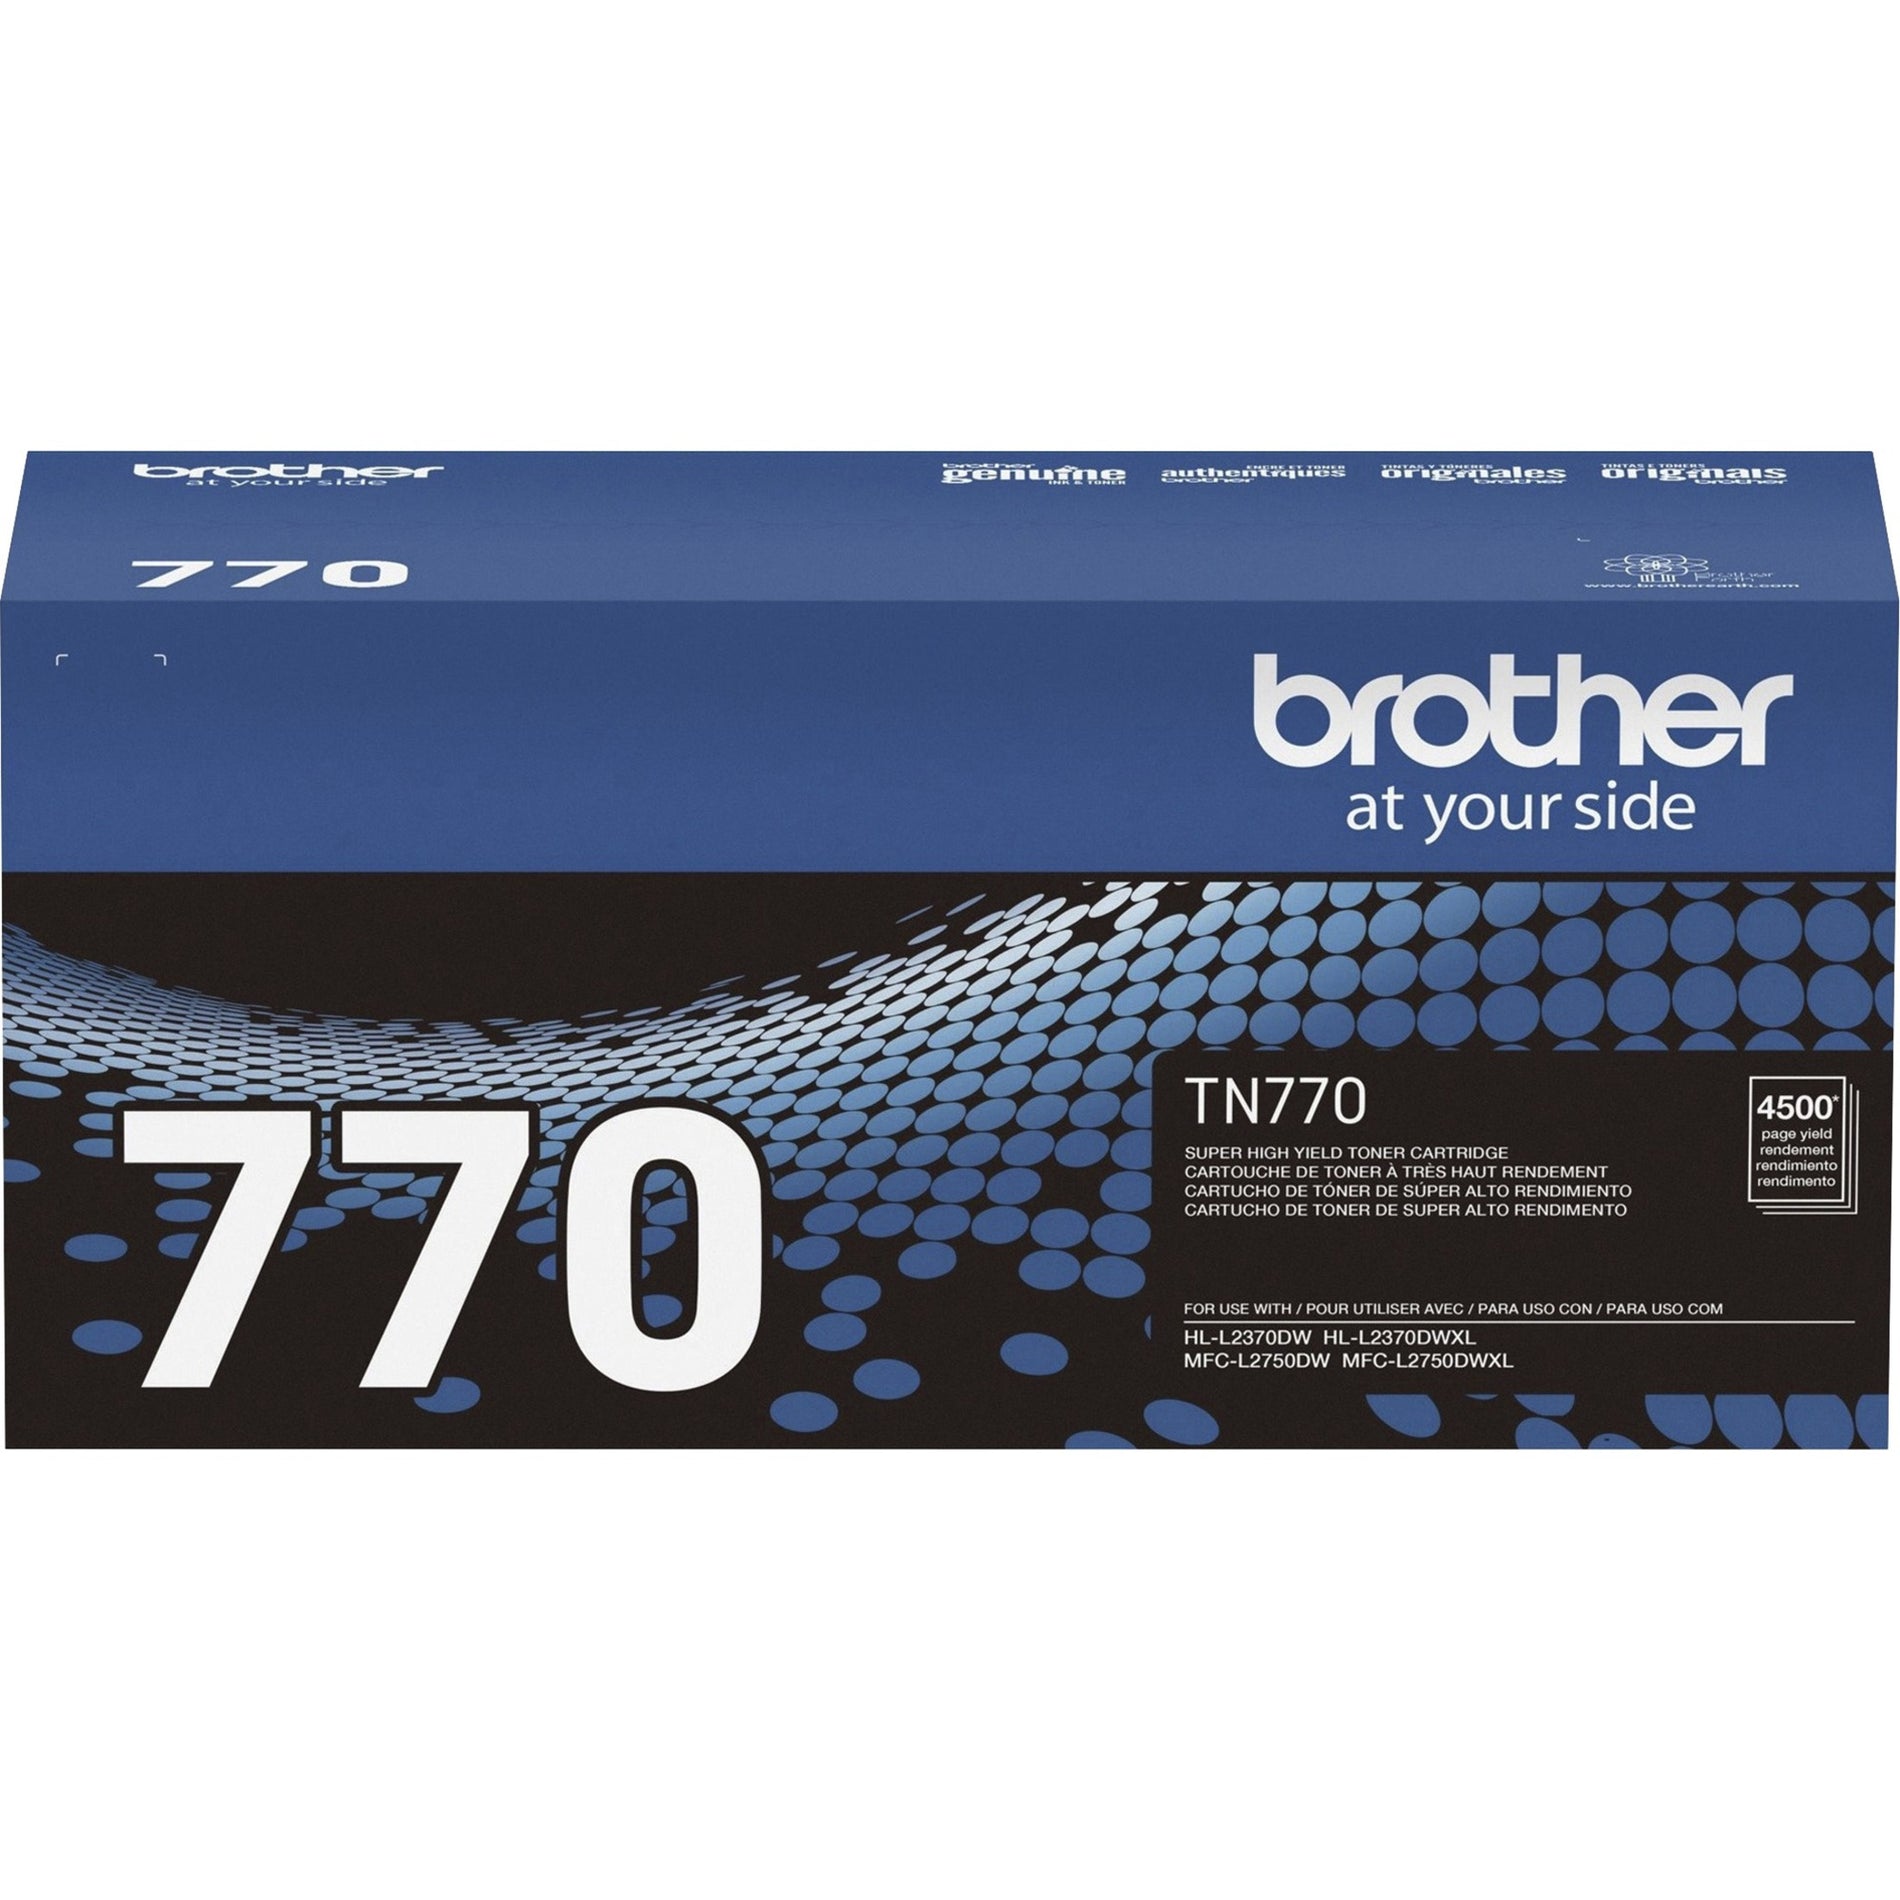 Brother TN-770 Super High Yield Toner Cartridge - Black, 4500 Pages